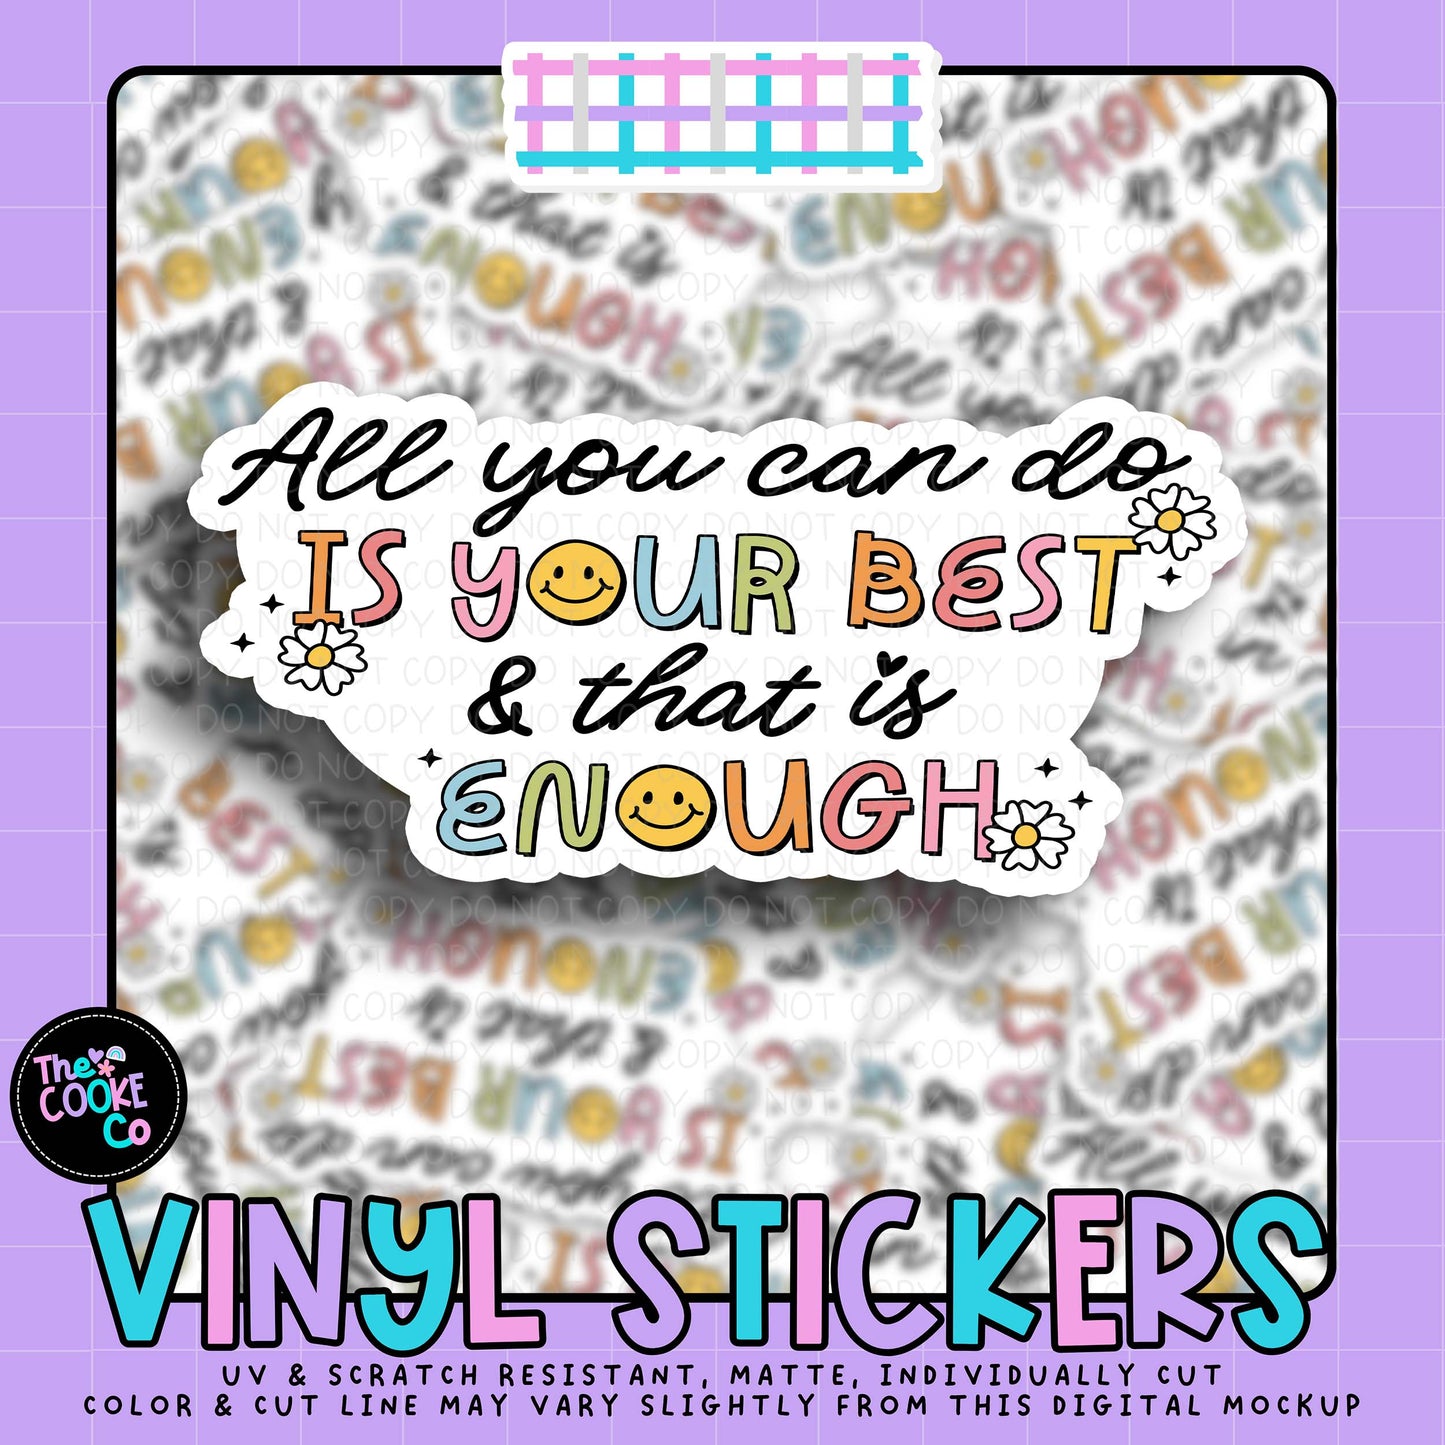 Vinyl Sticker | #V2051 - ALL YOU CAN DO IS YOUR BEST & THAT'S ENOUGH